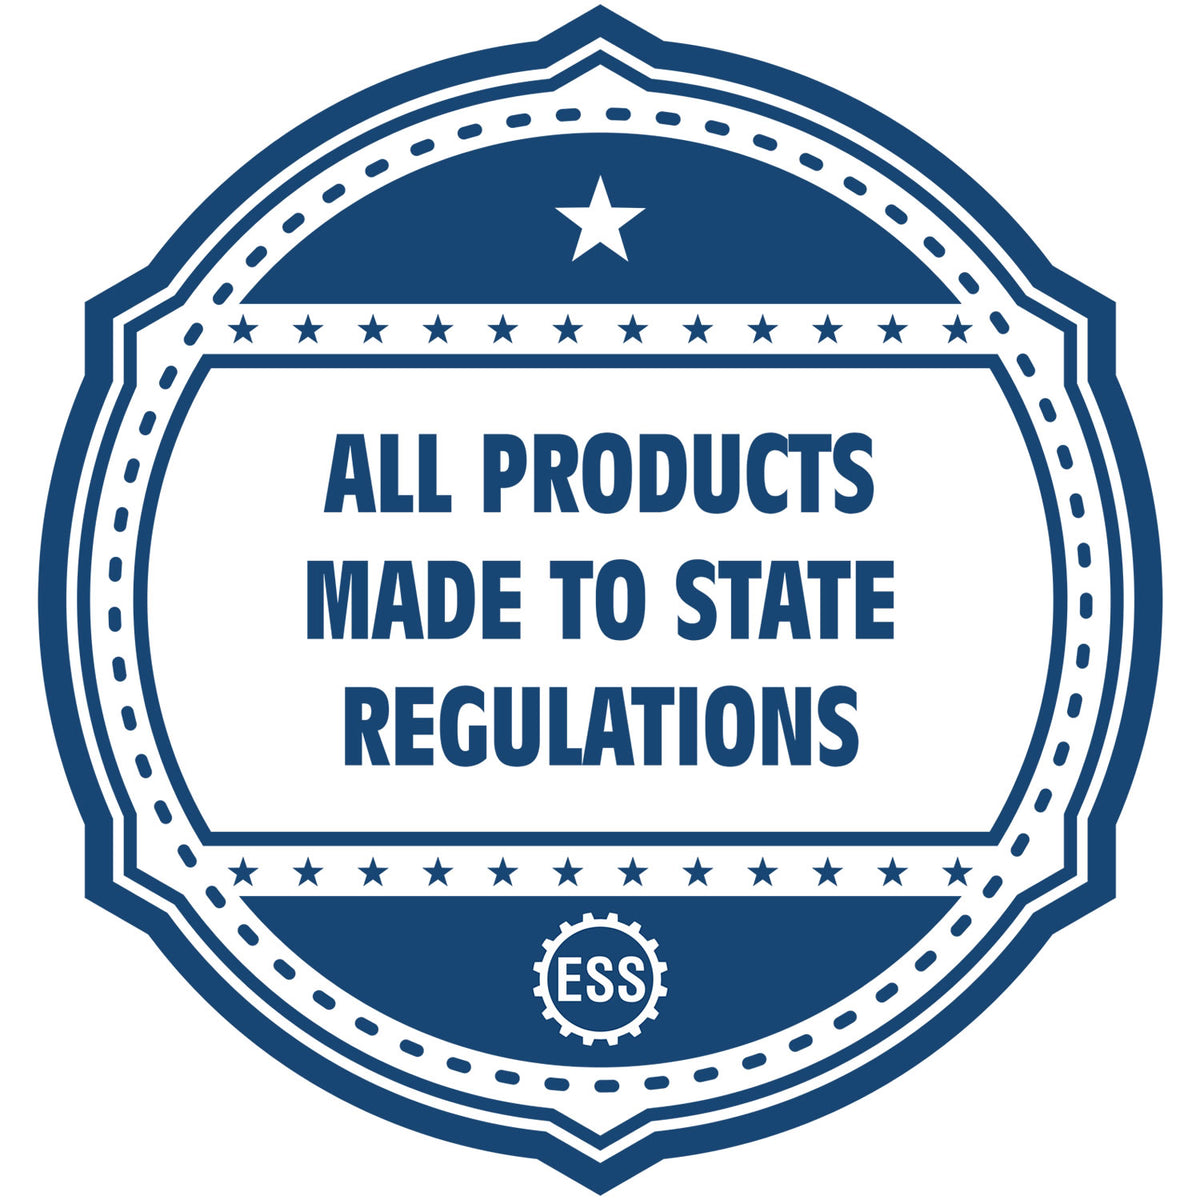 A blue icon or badge for the Soft Illinois Professional Geologist Seal showing that this product is made in compliance with state regulations.